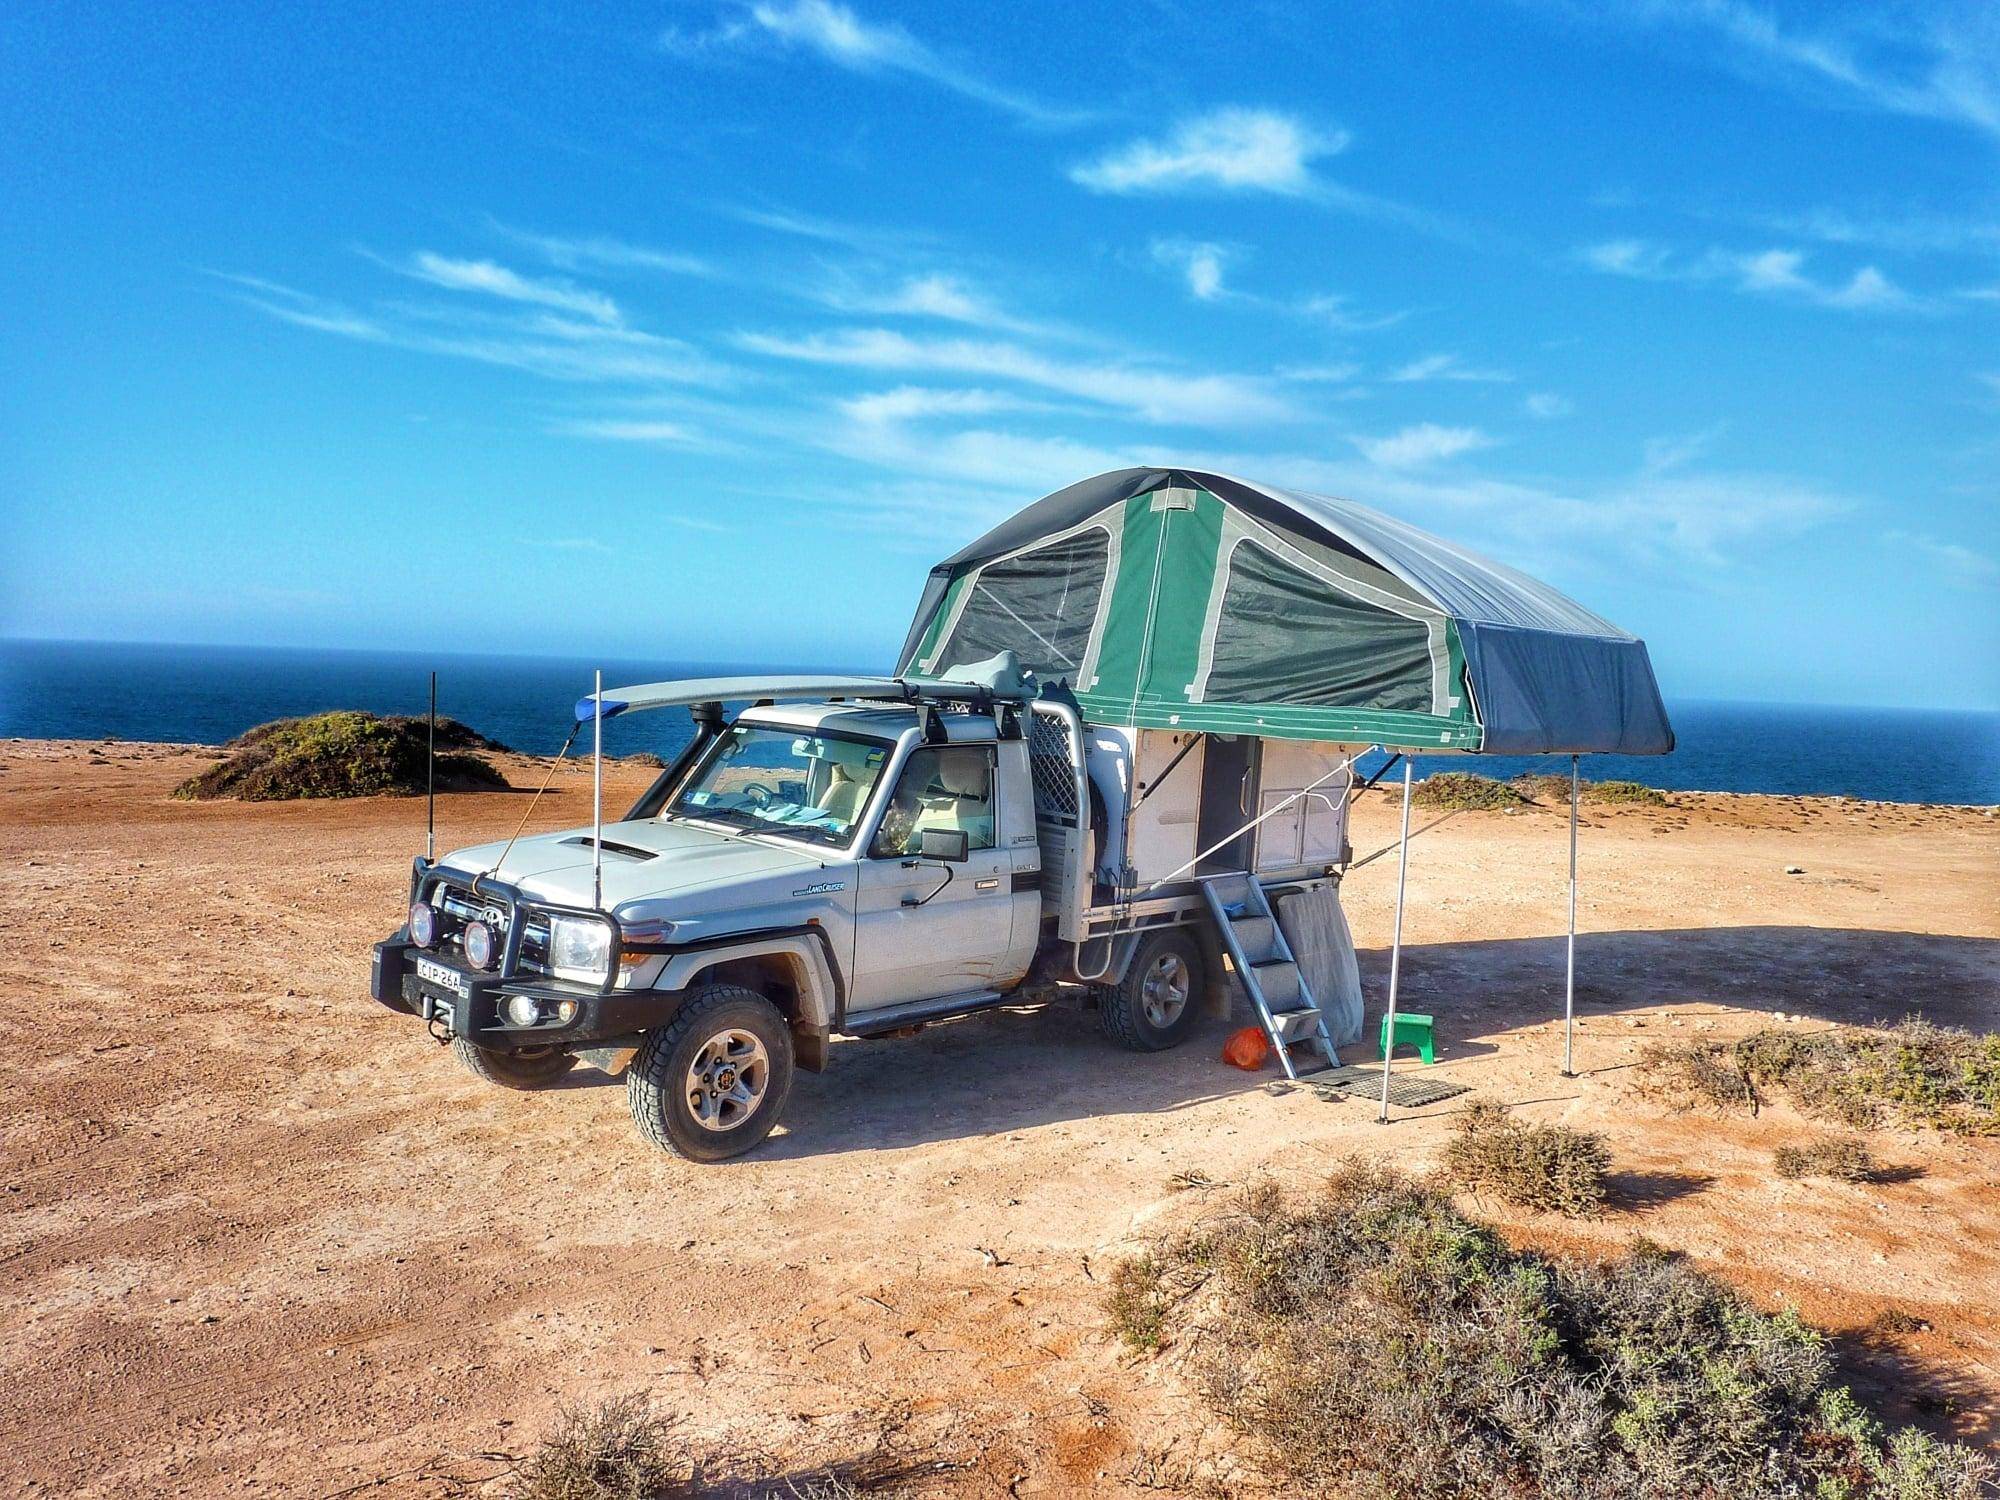 Compact car with a raised pop-top roof, ideal for camping adventures